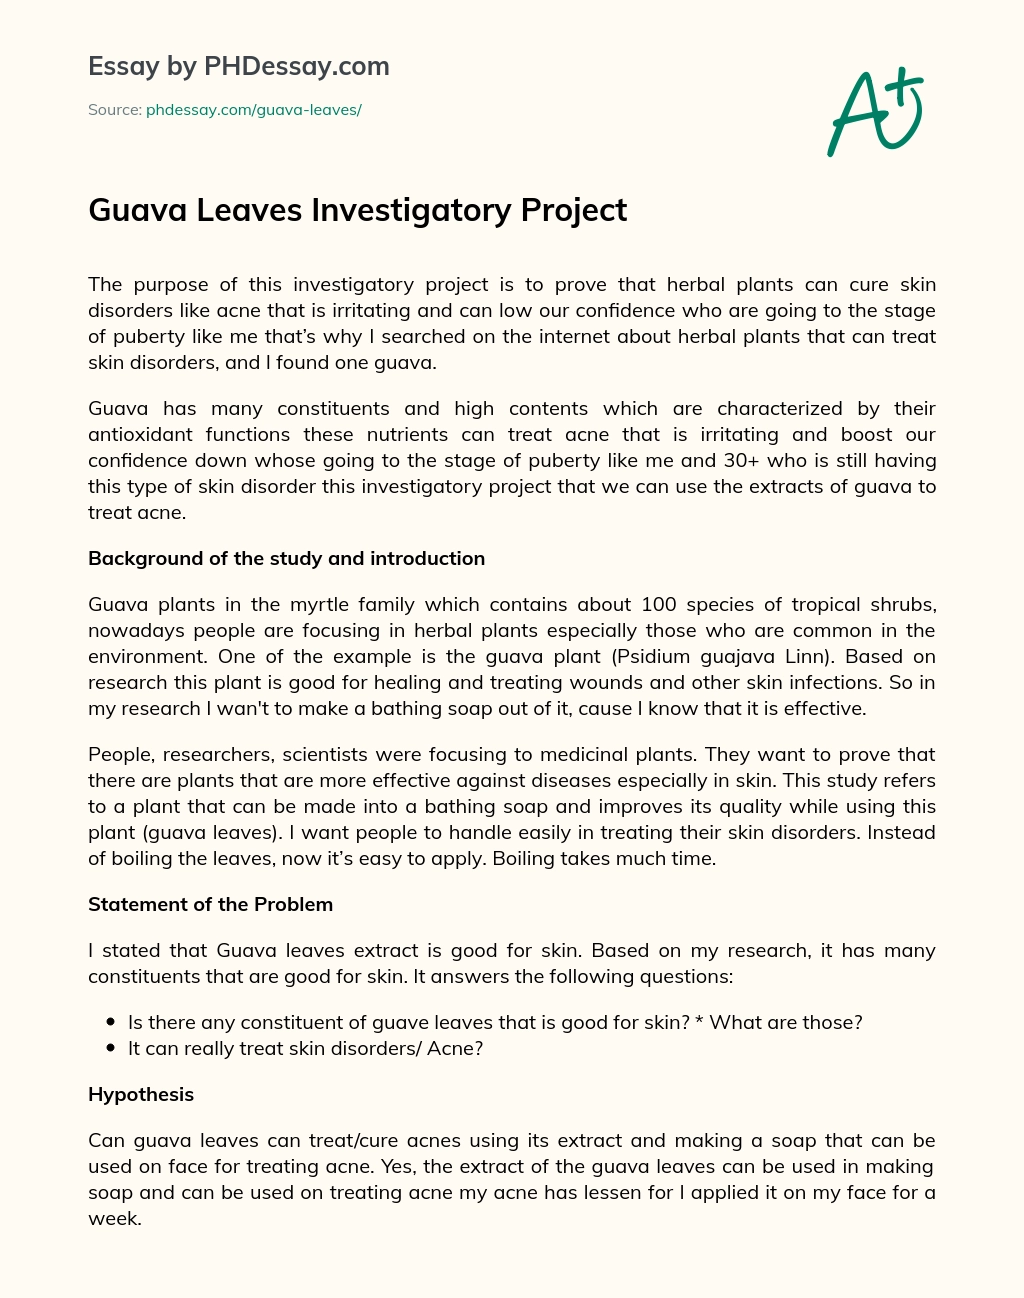 Guava Leaves Investigatory Project essay